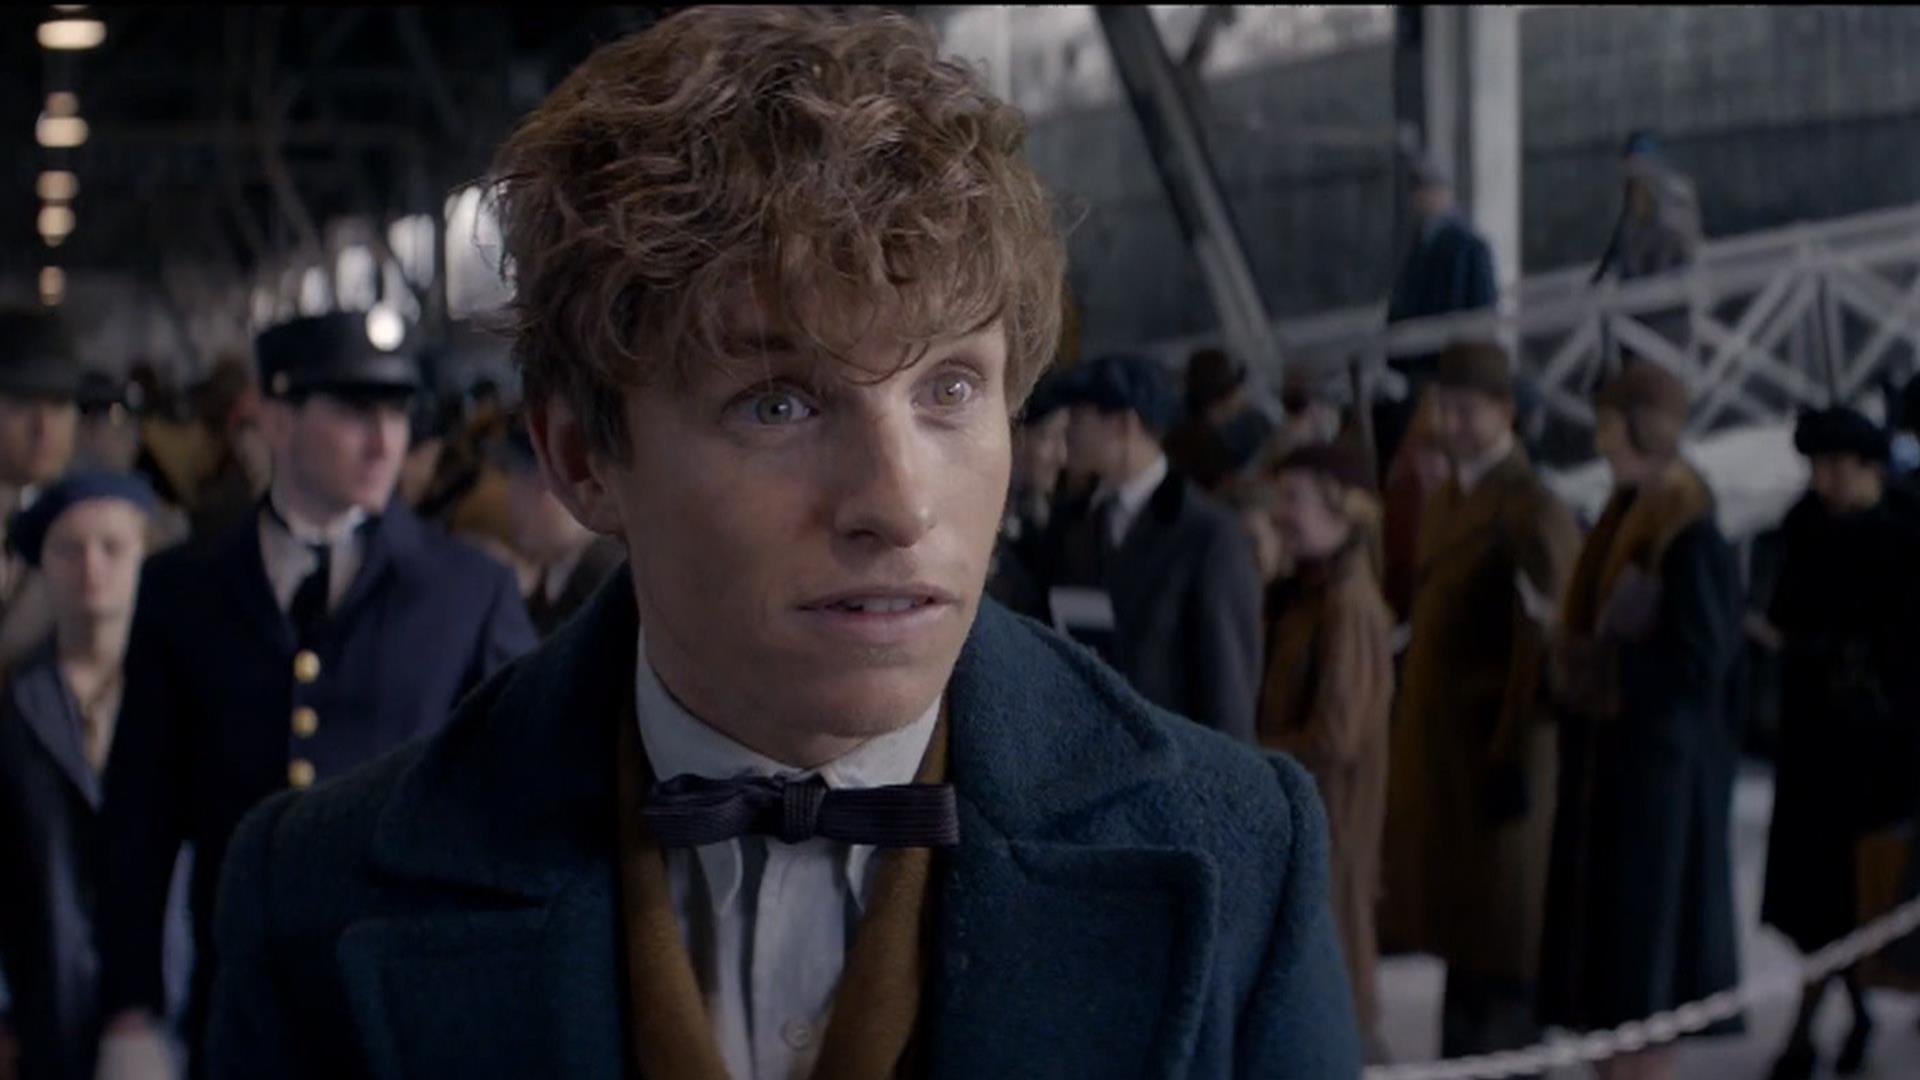 Online Watch 2016 Full-Length Film Fantastic Beasts And Where To Find Them